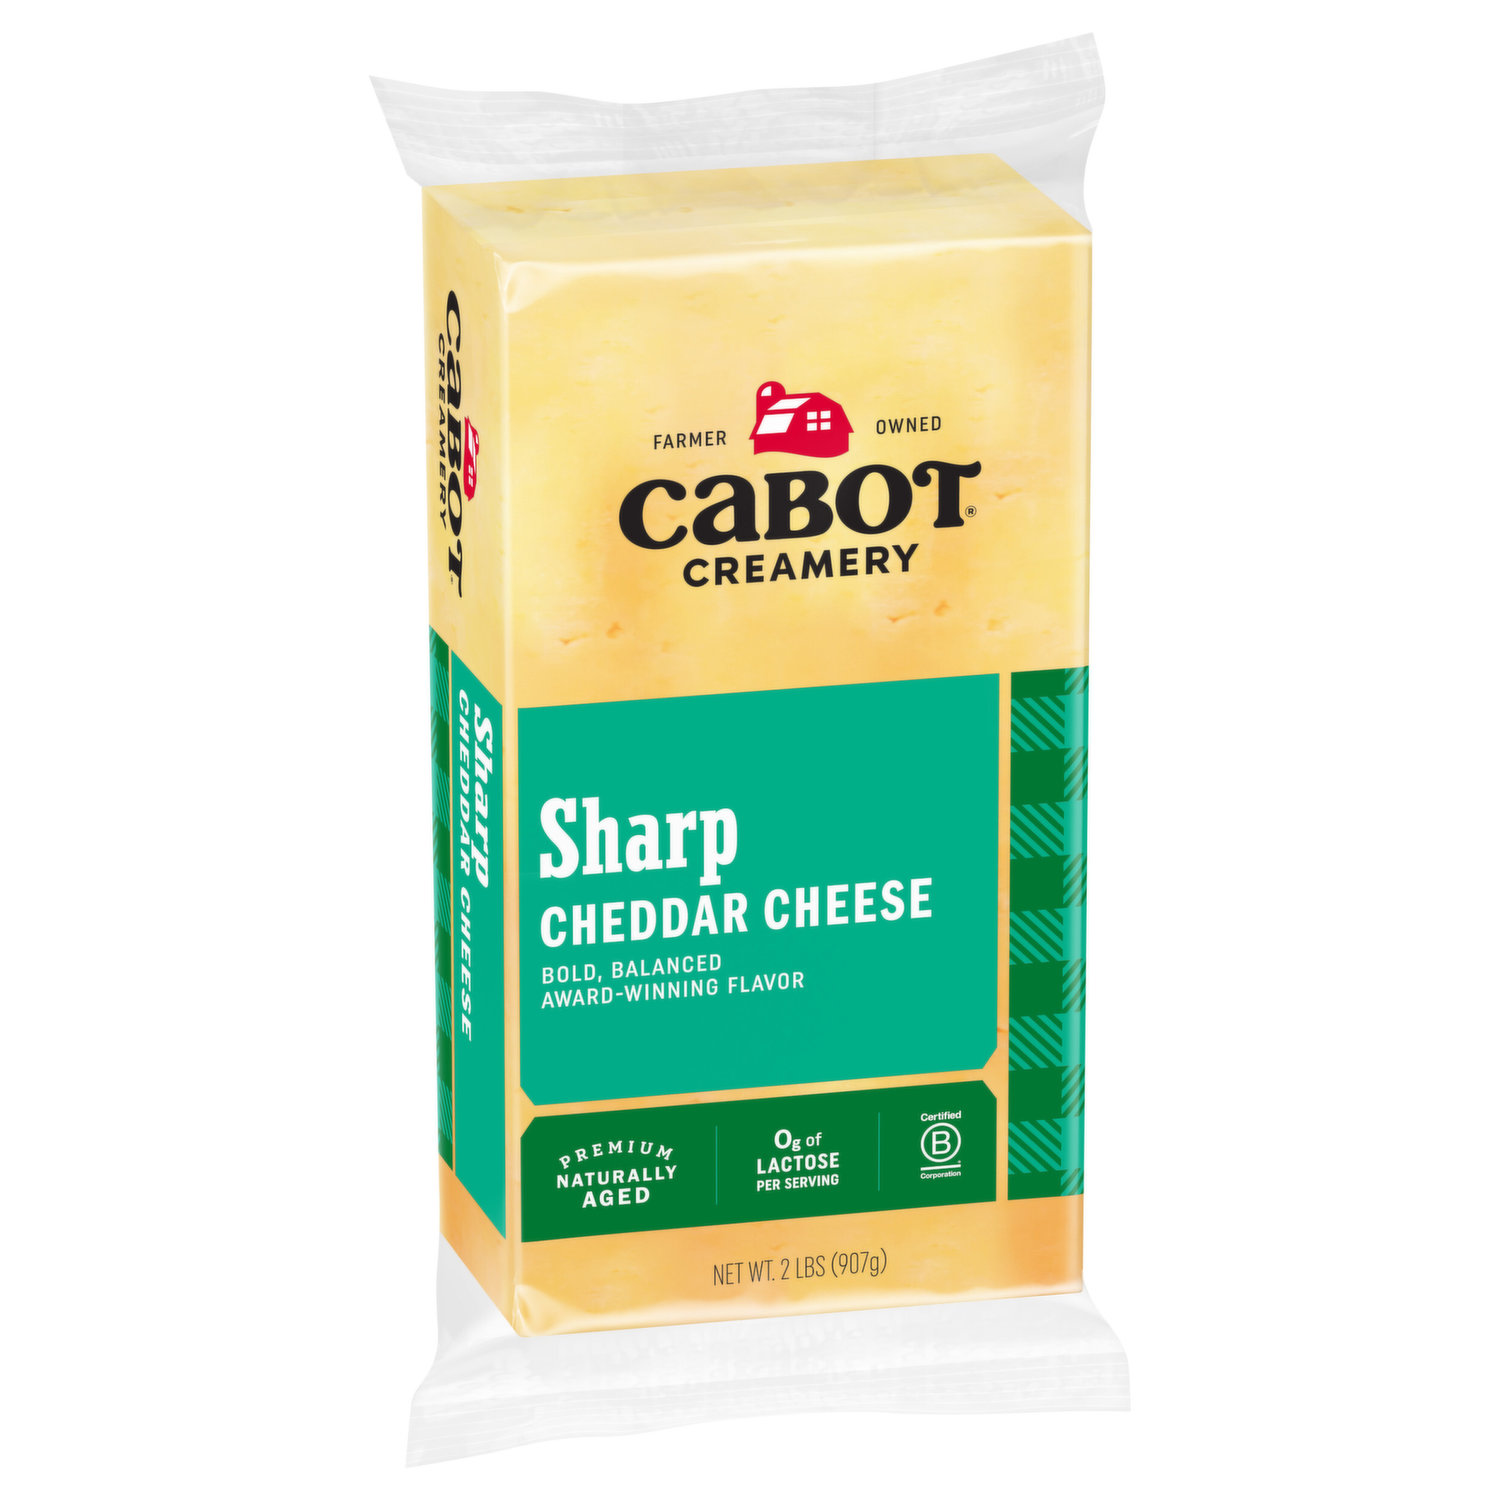 The Cheddar Encyclopedia: Facts about Cheddar Cheese – Cabot Creamery